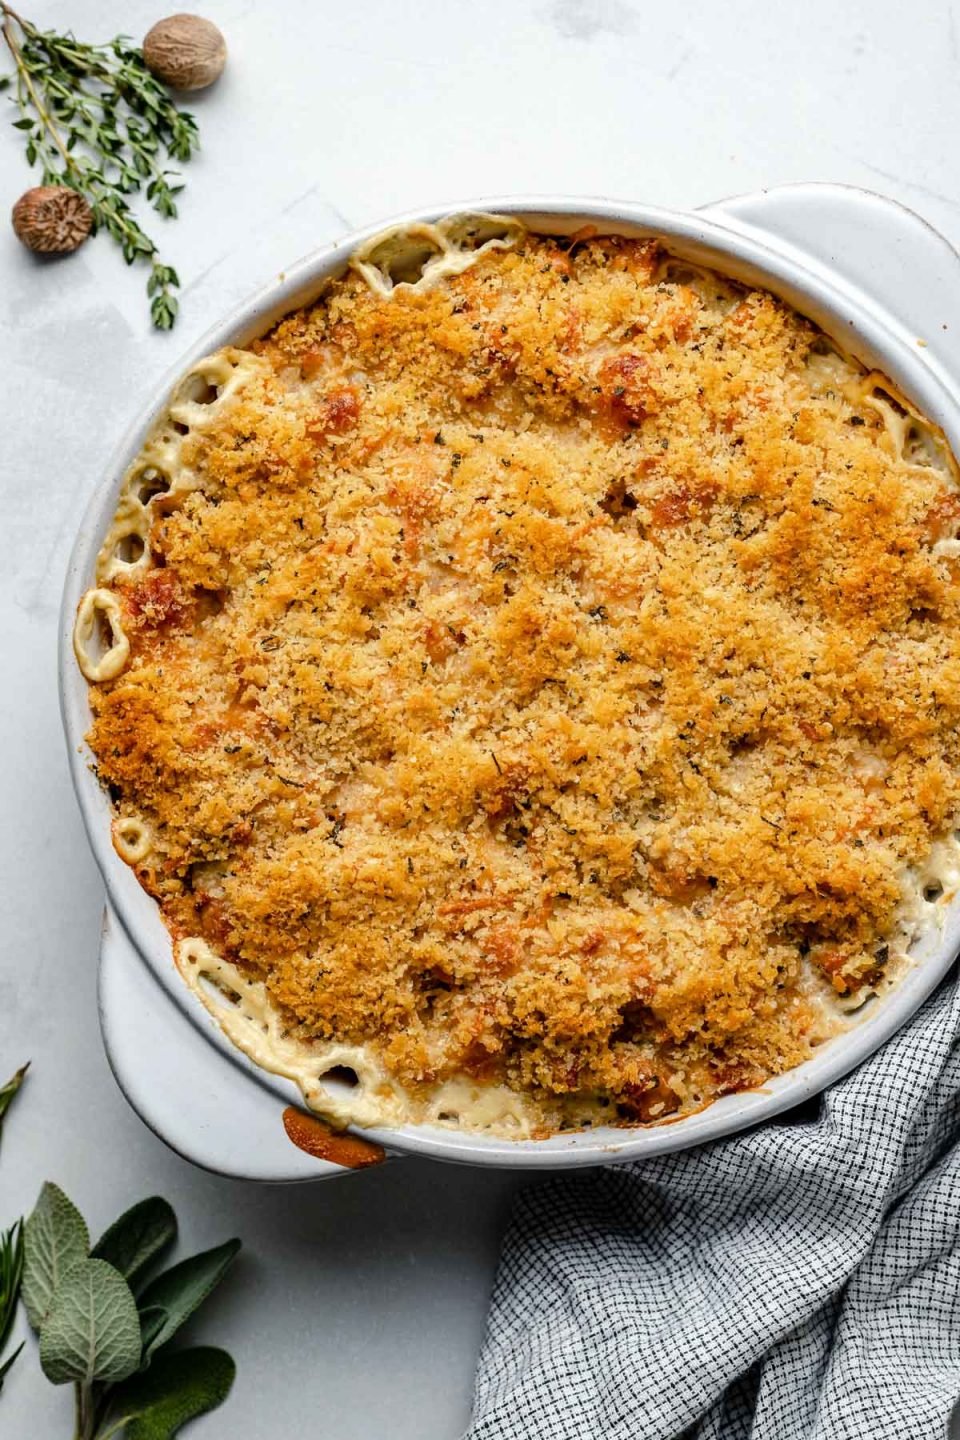 Baked butternut squash au gratin in a round baking dish. The baking dish sits atop a light blue surface, next to a checkered linen napkin, fresh herbs & whole nutmeg.